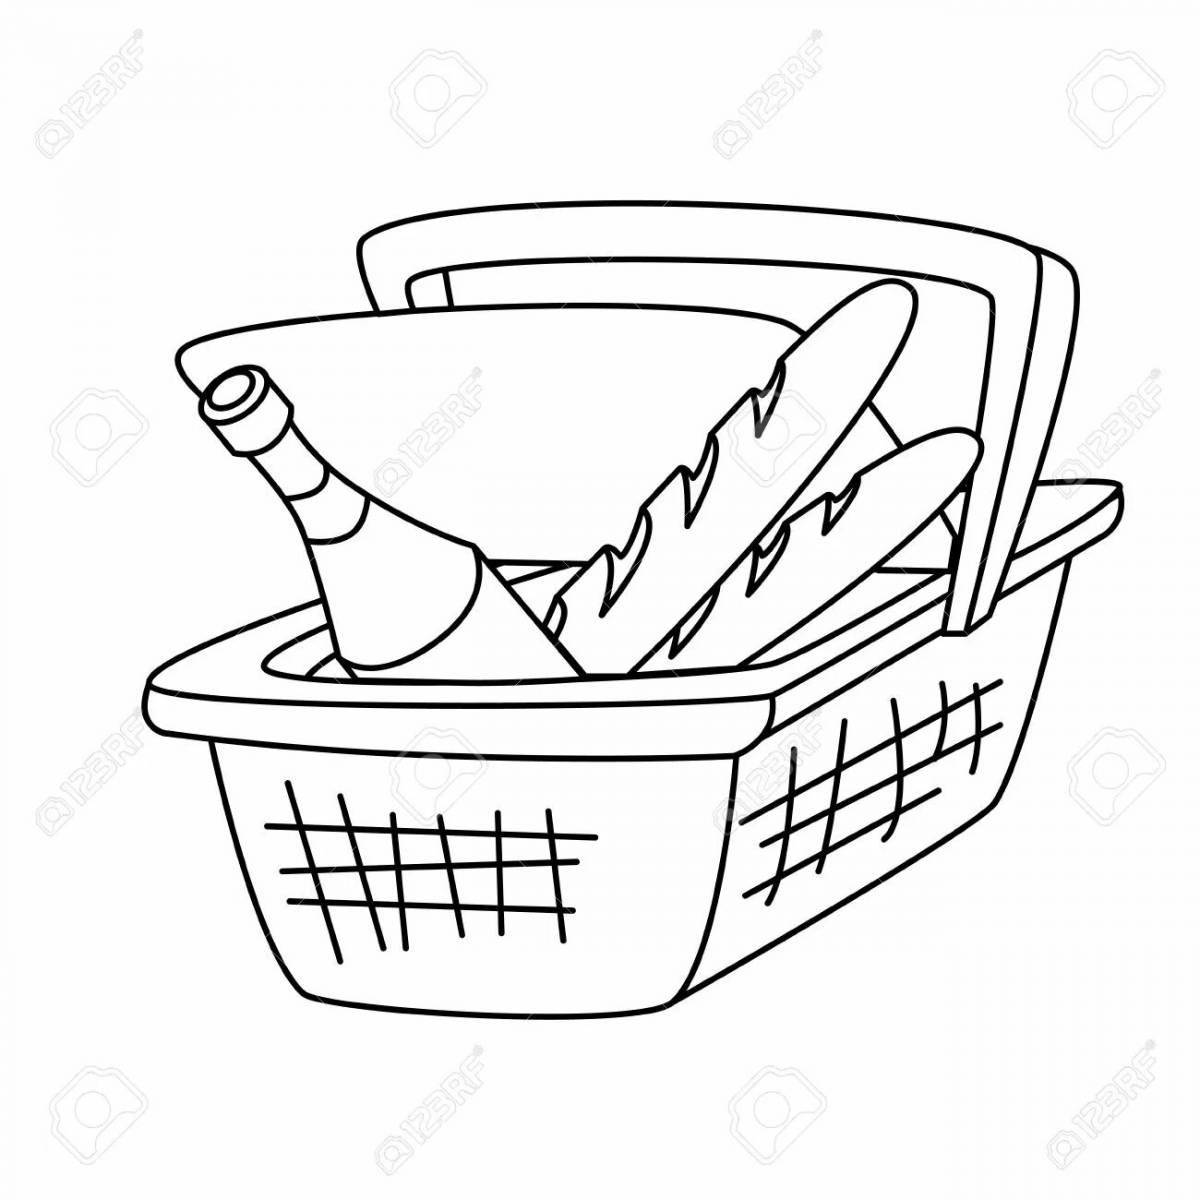 Colorful picnic basket with food